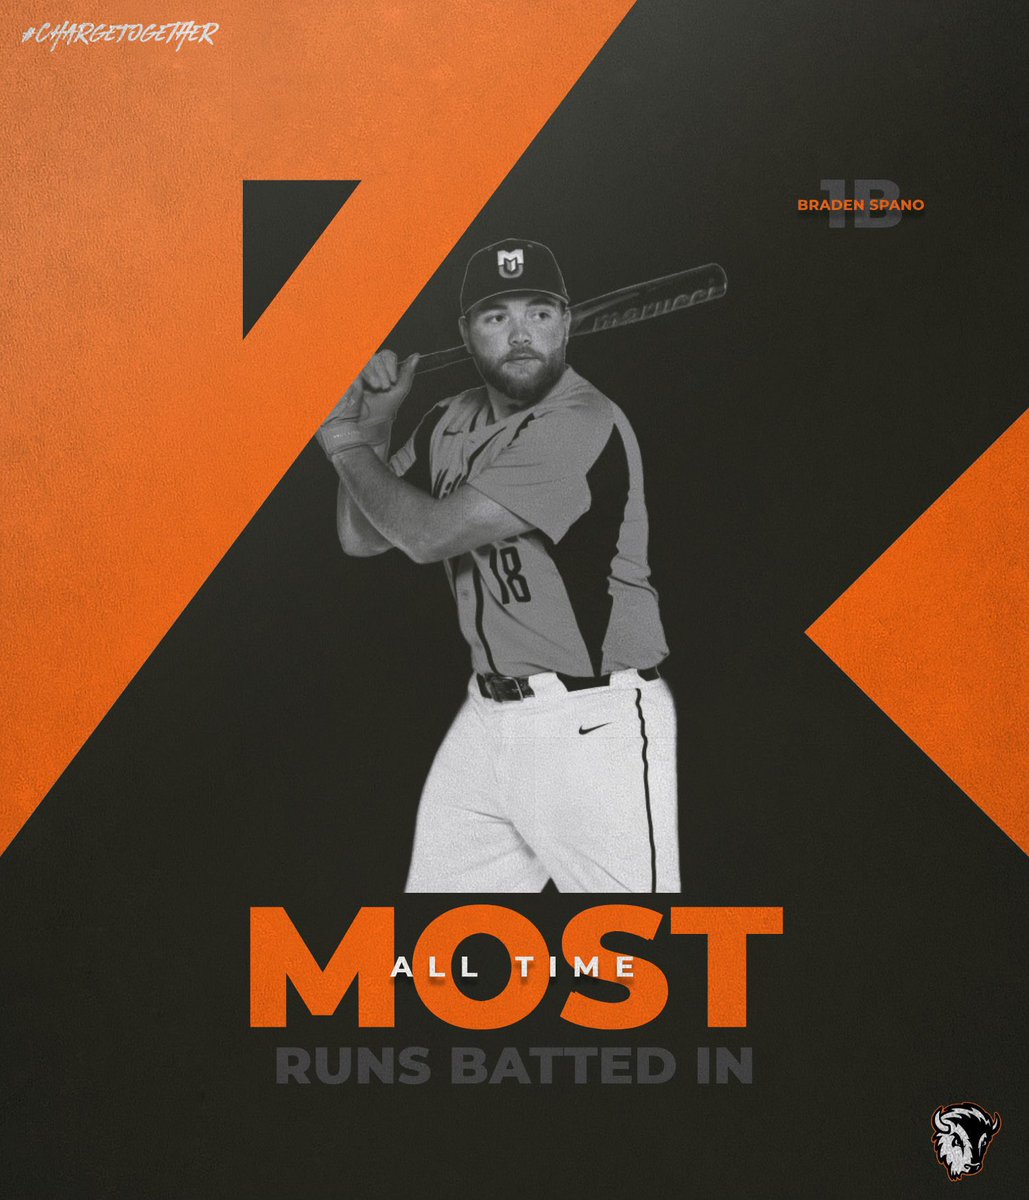 Congratulations to our guy, Braden Spano who is now Milligan University’s ALL TIME Leader in Runs Batted In!! 

During his time at Milligan, Spano has accumulated 165 Runs Batted In!!

#ChargeTogether x #BuffStrong